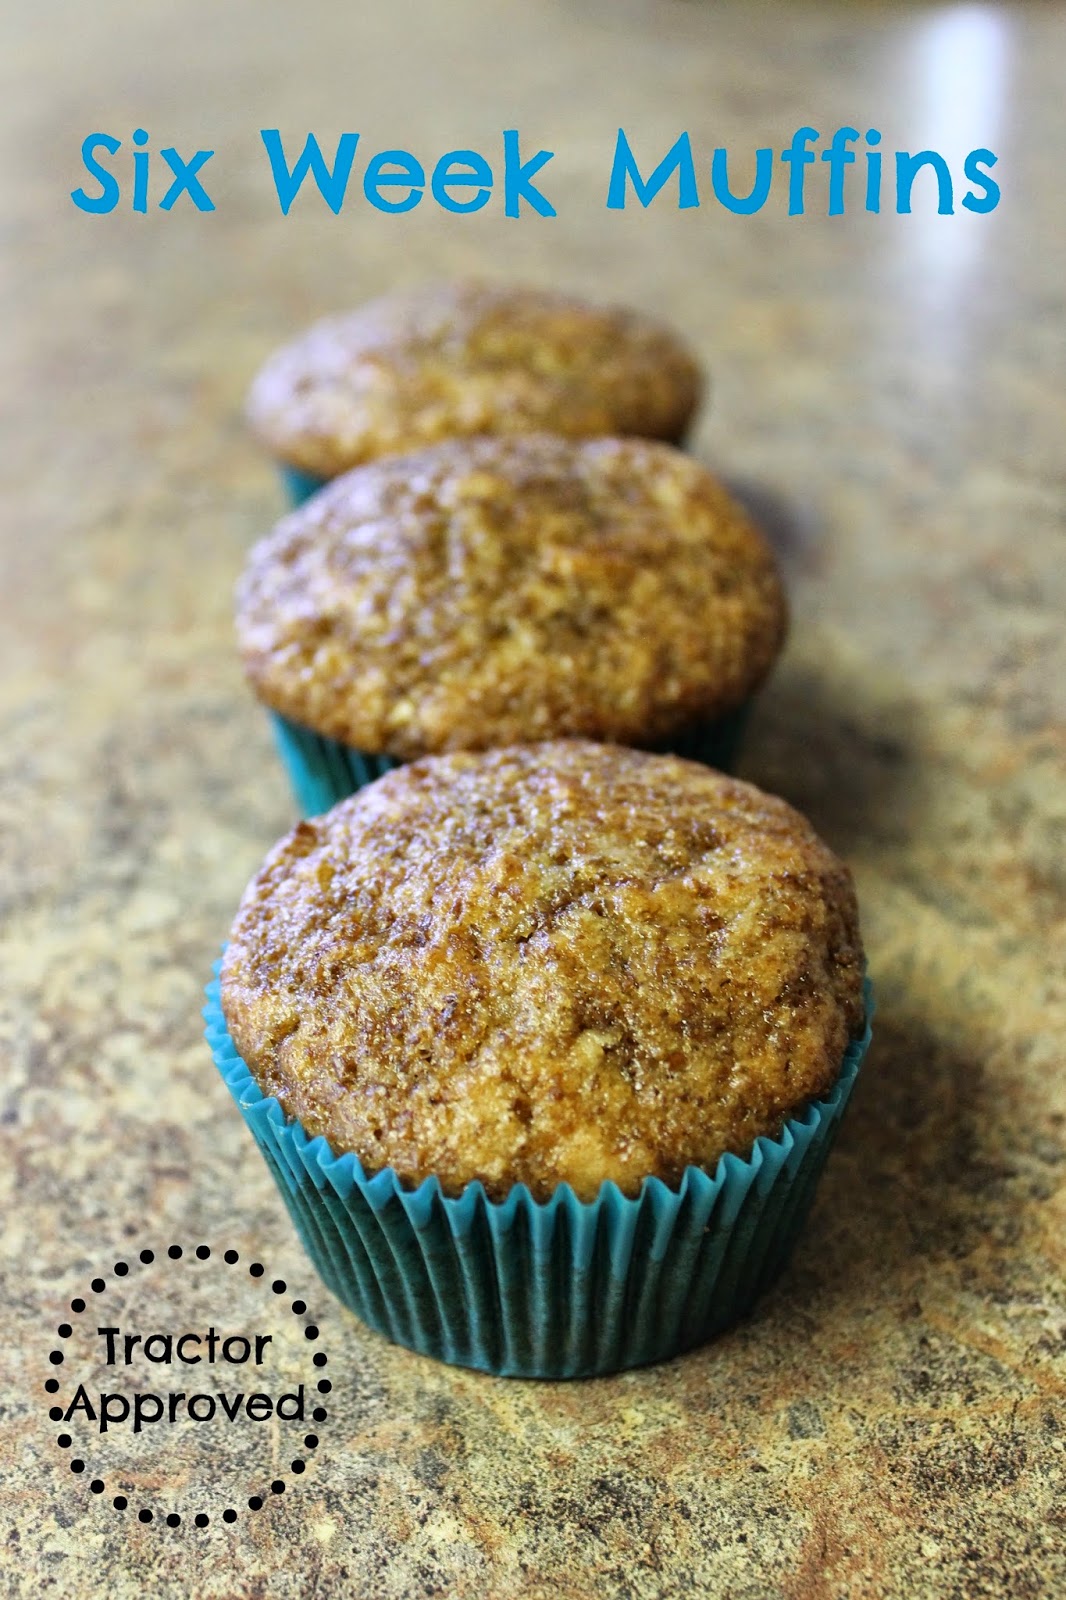 Six Week Muffins - fresh muffins for up to six weeks